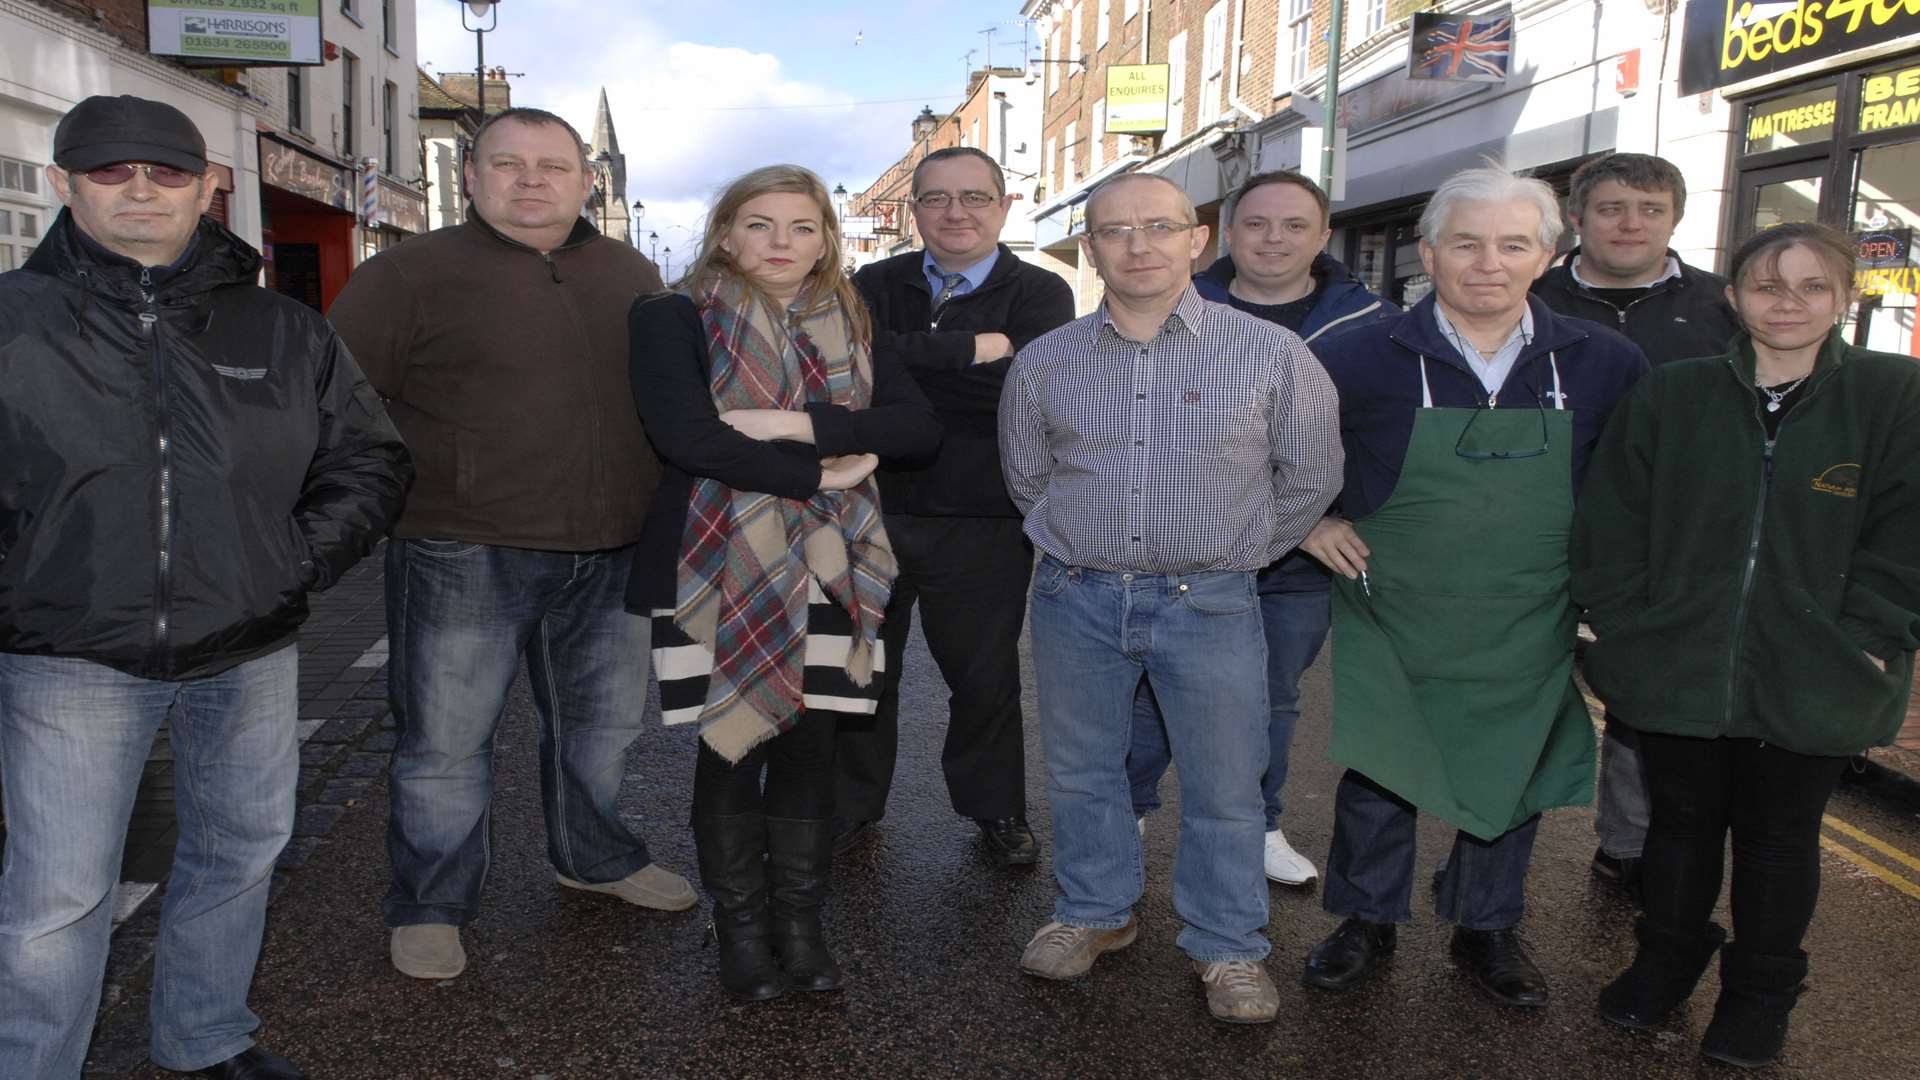 Sittingbourne traders who oppose to plans to close the High Street on Fridays.